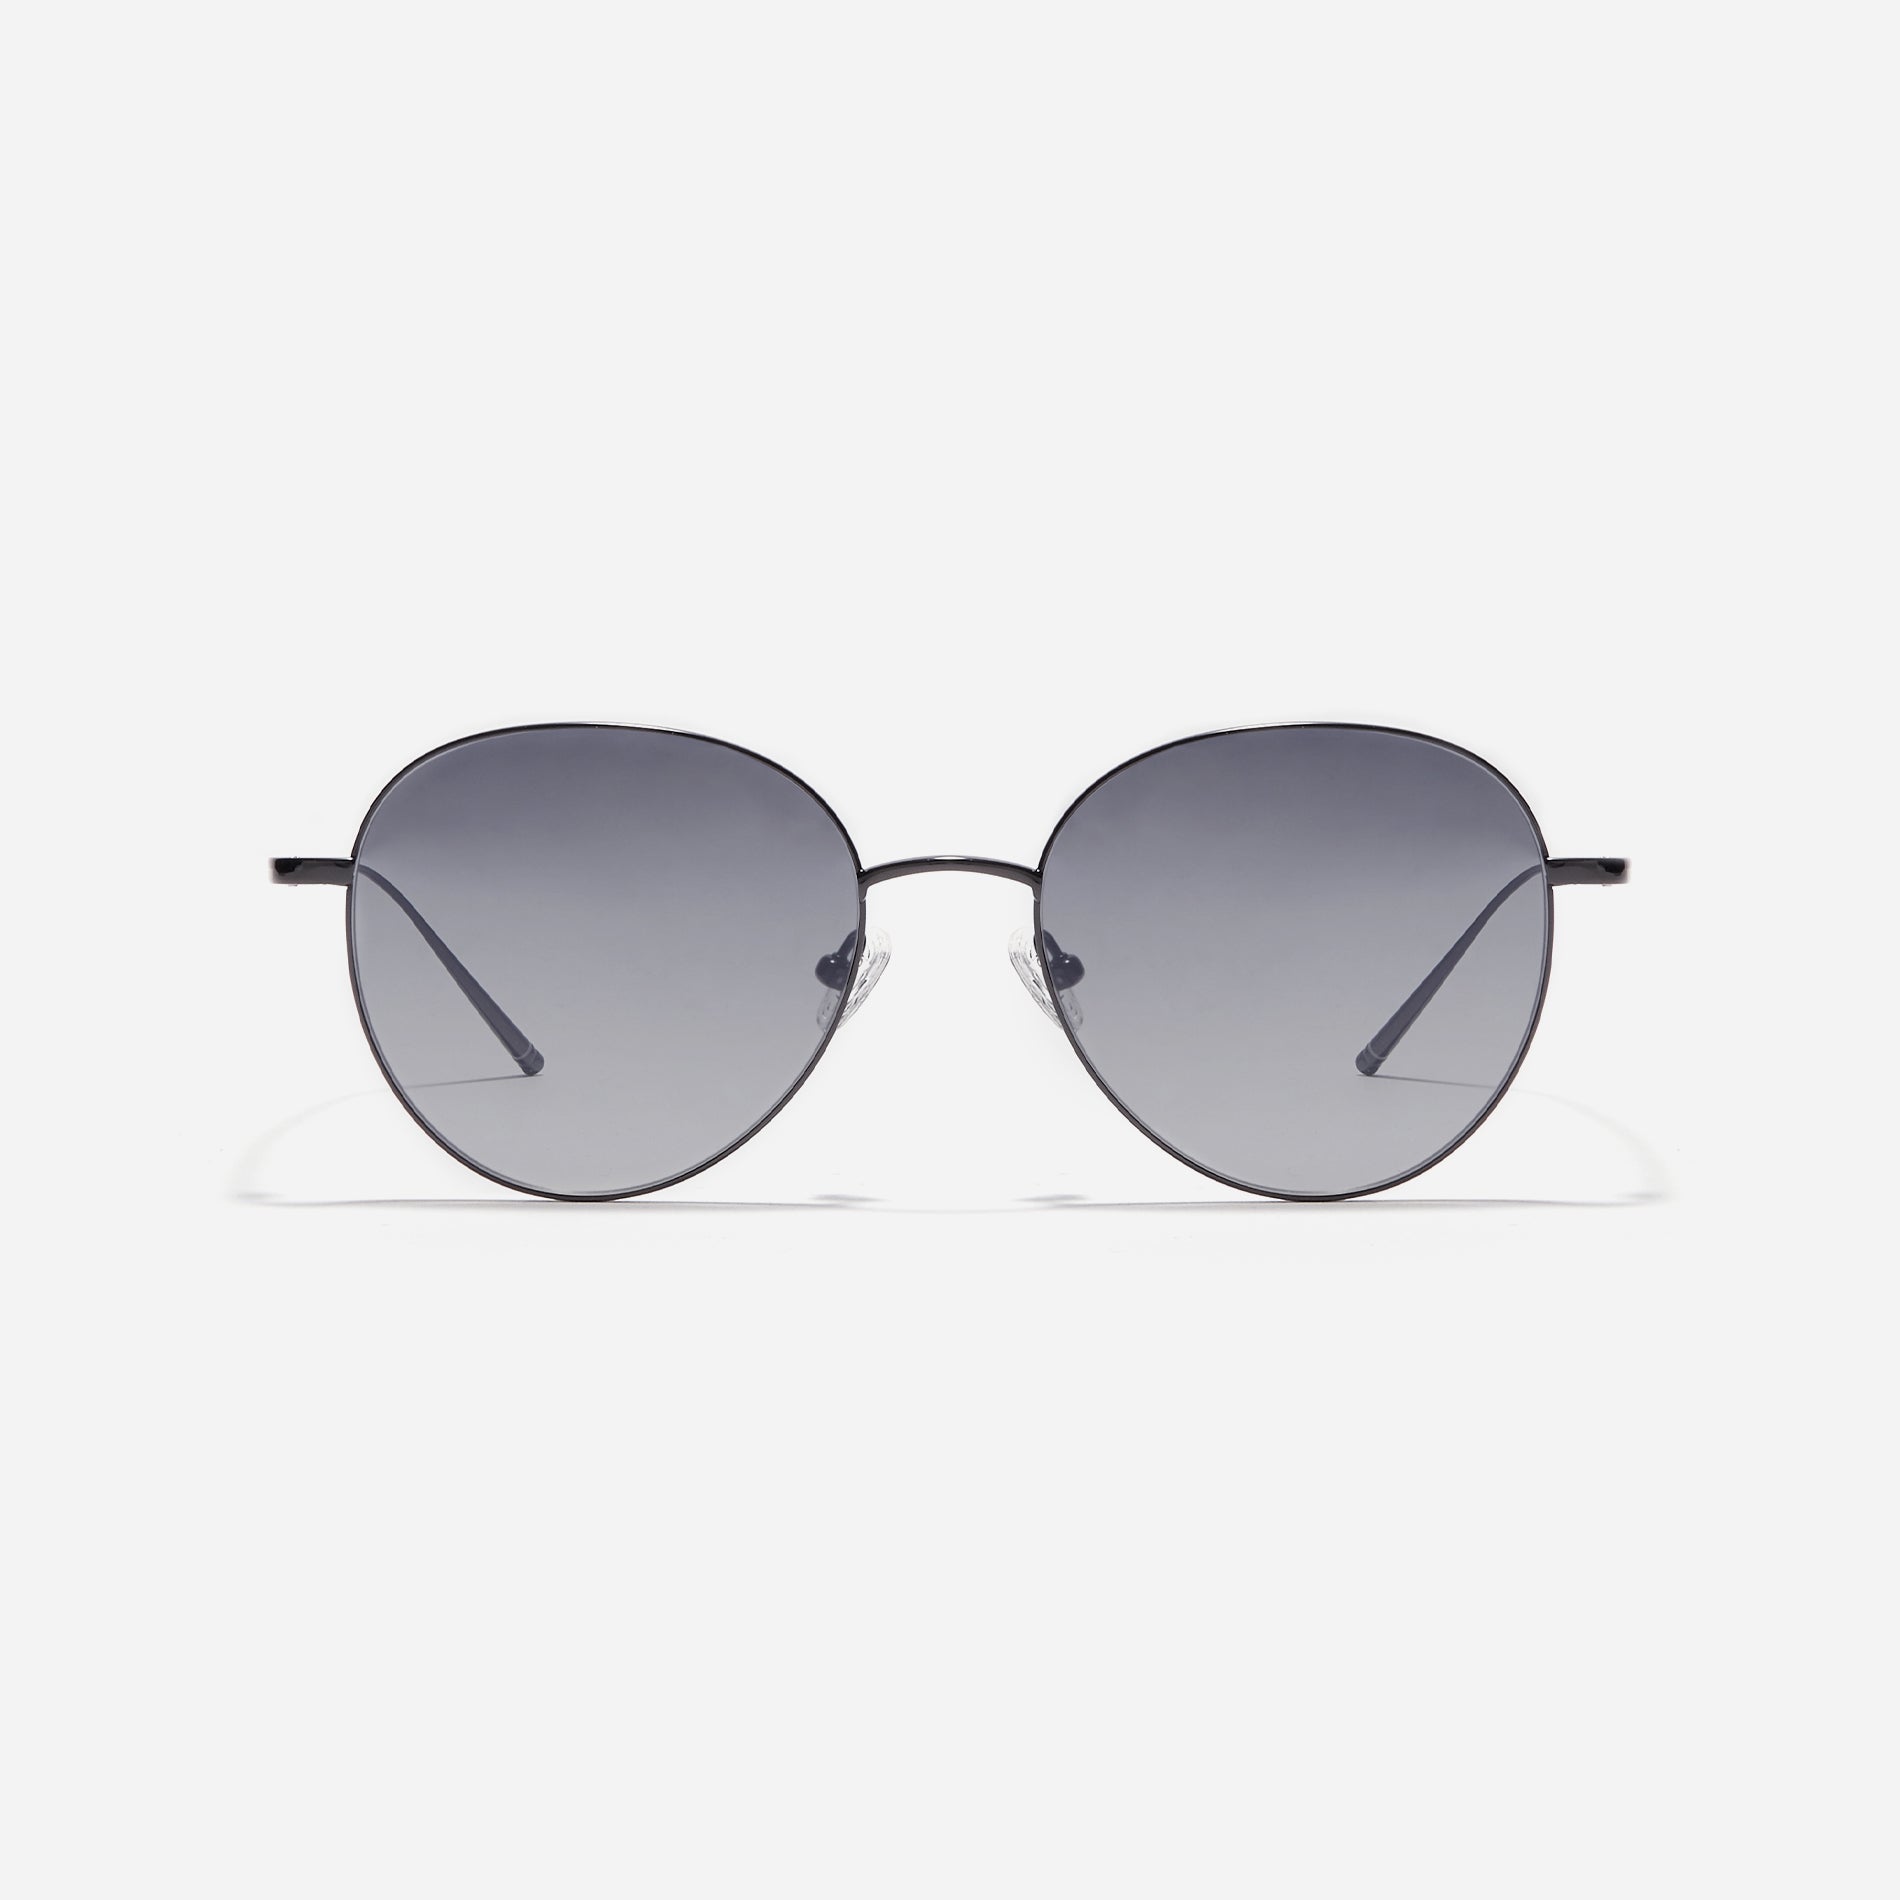 Round-shaped sunglasses crafted entirely from lightweight titanium. They feature semi-mirrored lenses that effectively reflect light, minimizing eye fatigue.